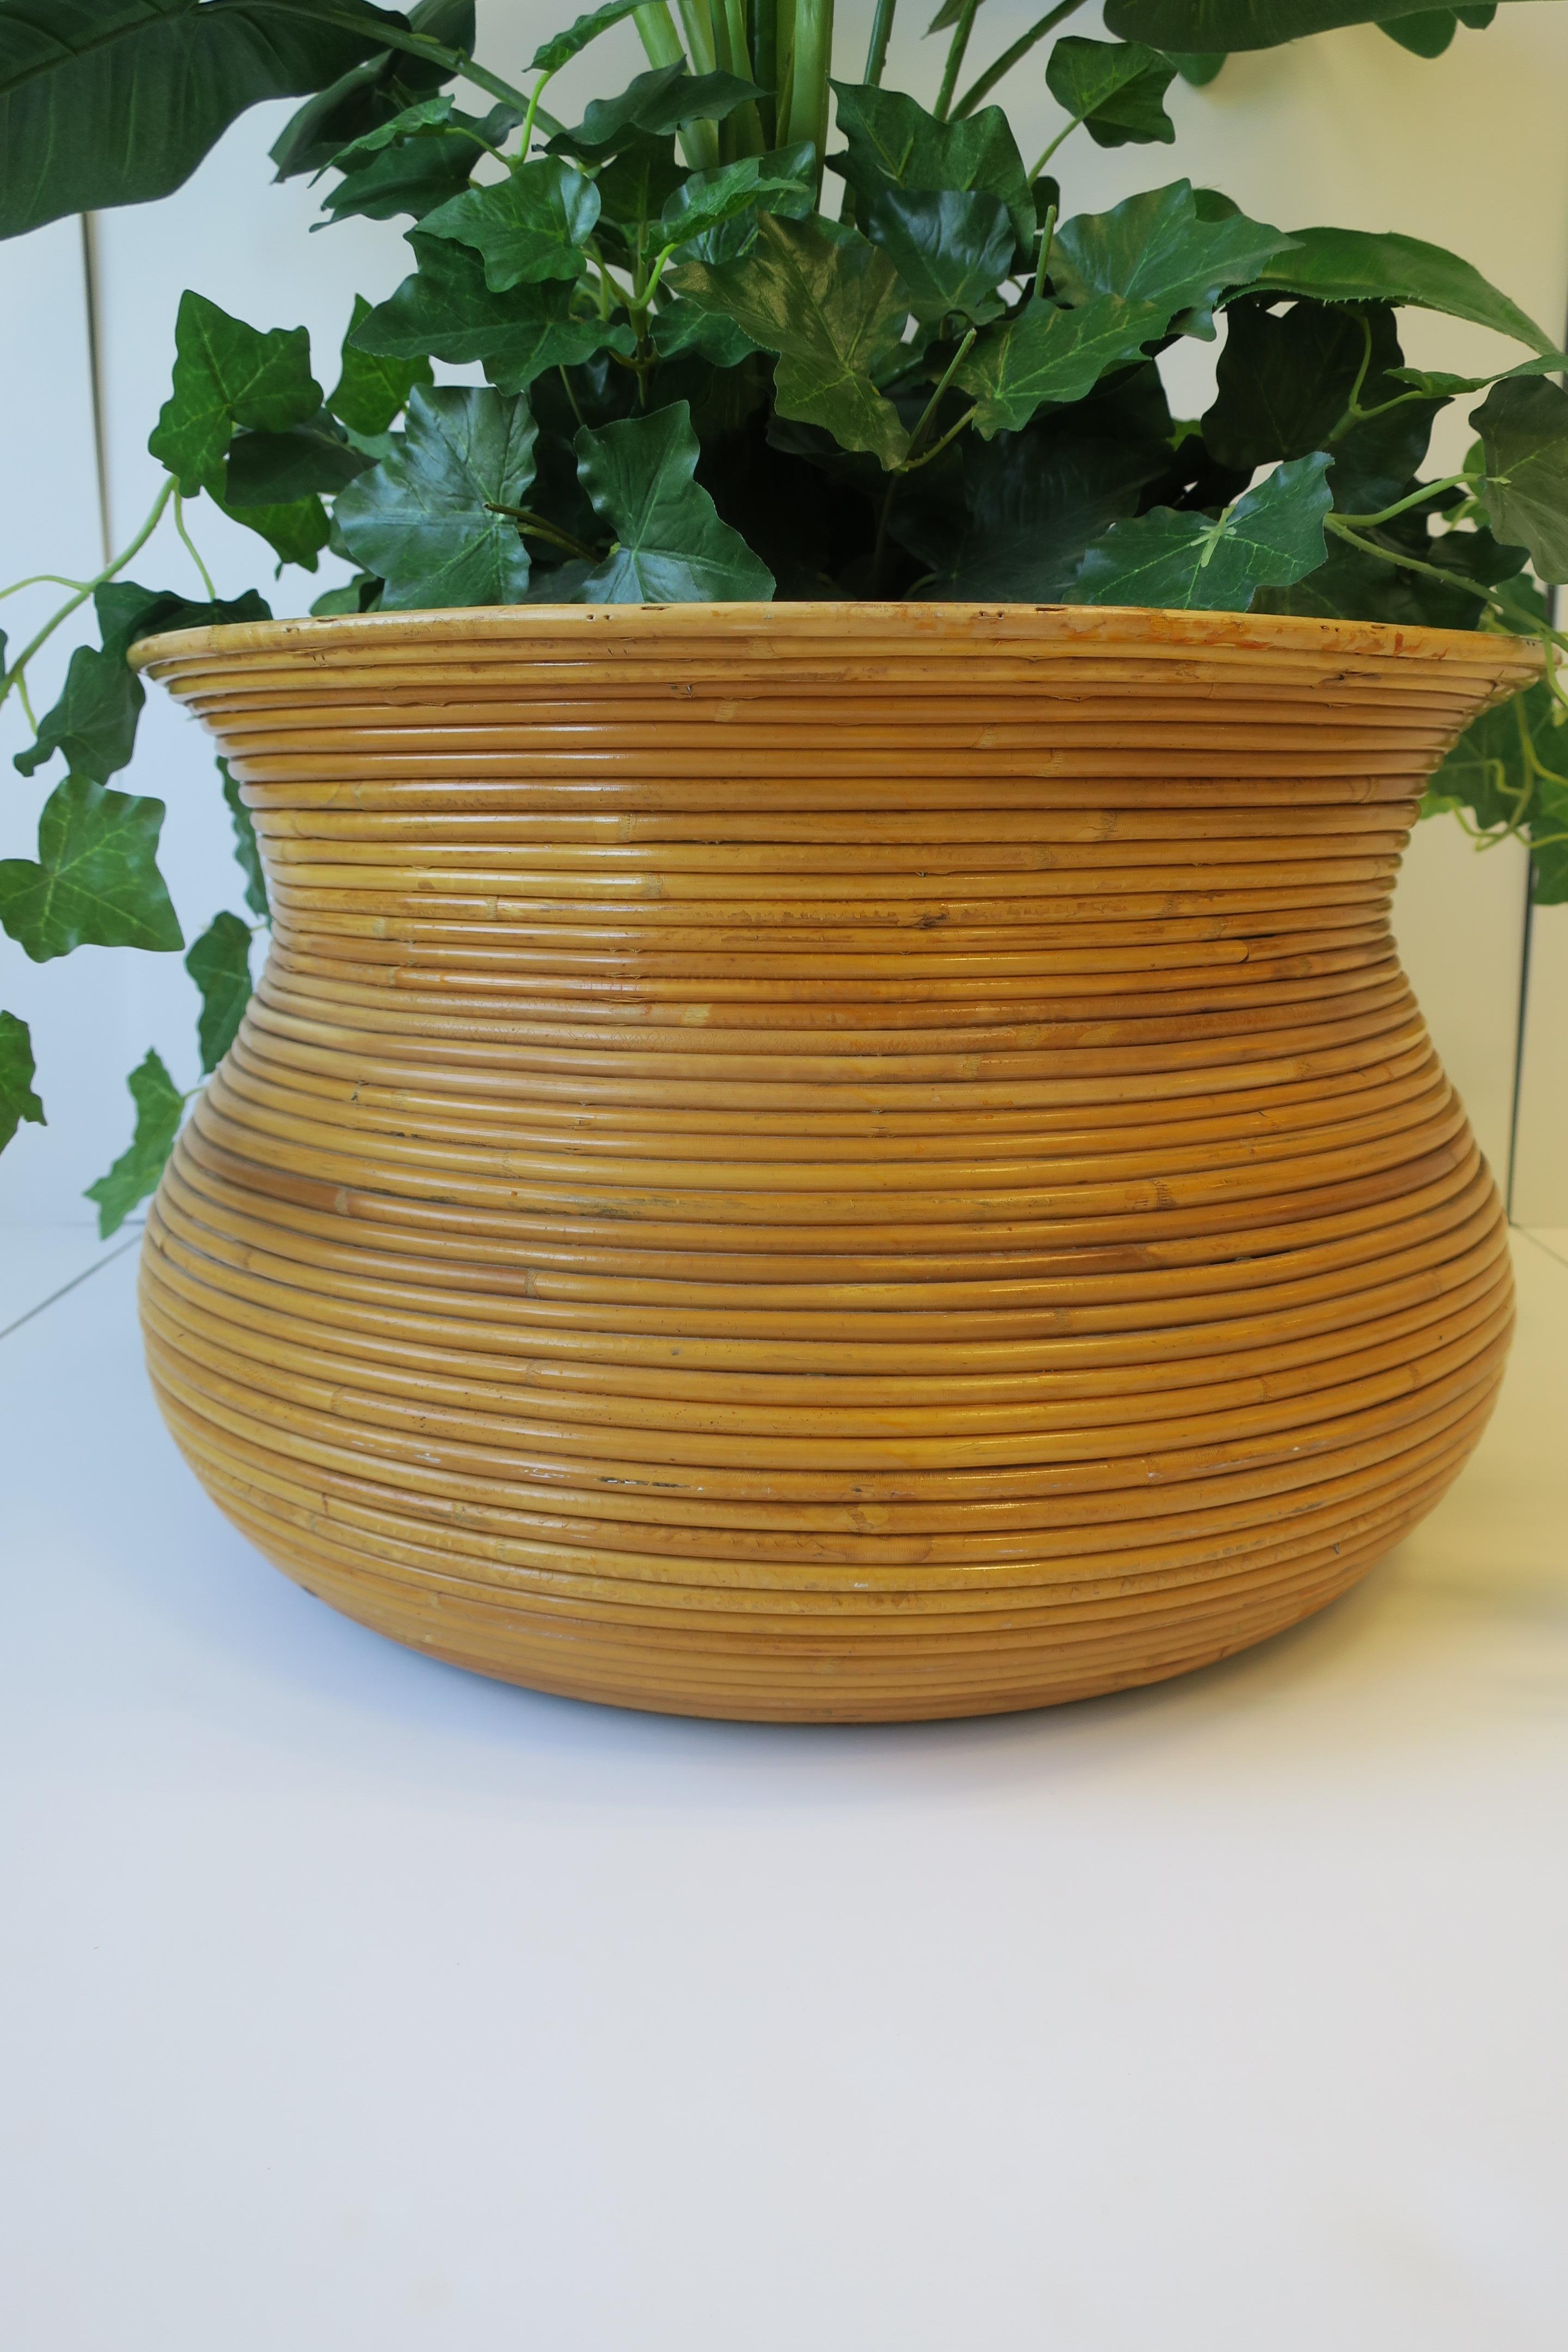 Wicker Rattan Pencil Reed Cachepot Plant Pot Holder in the Crespi Style, Large 3